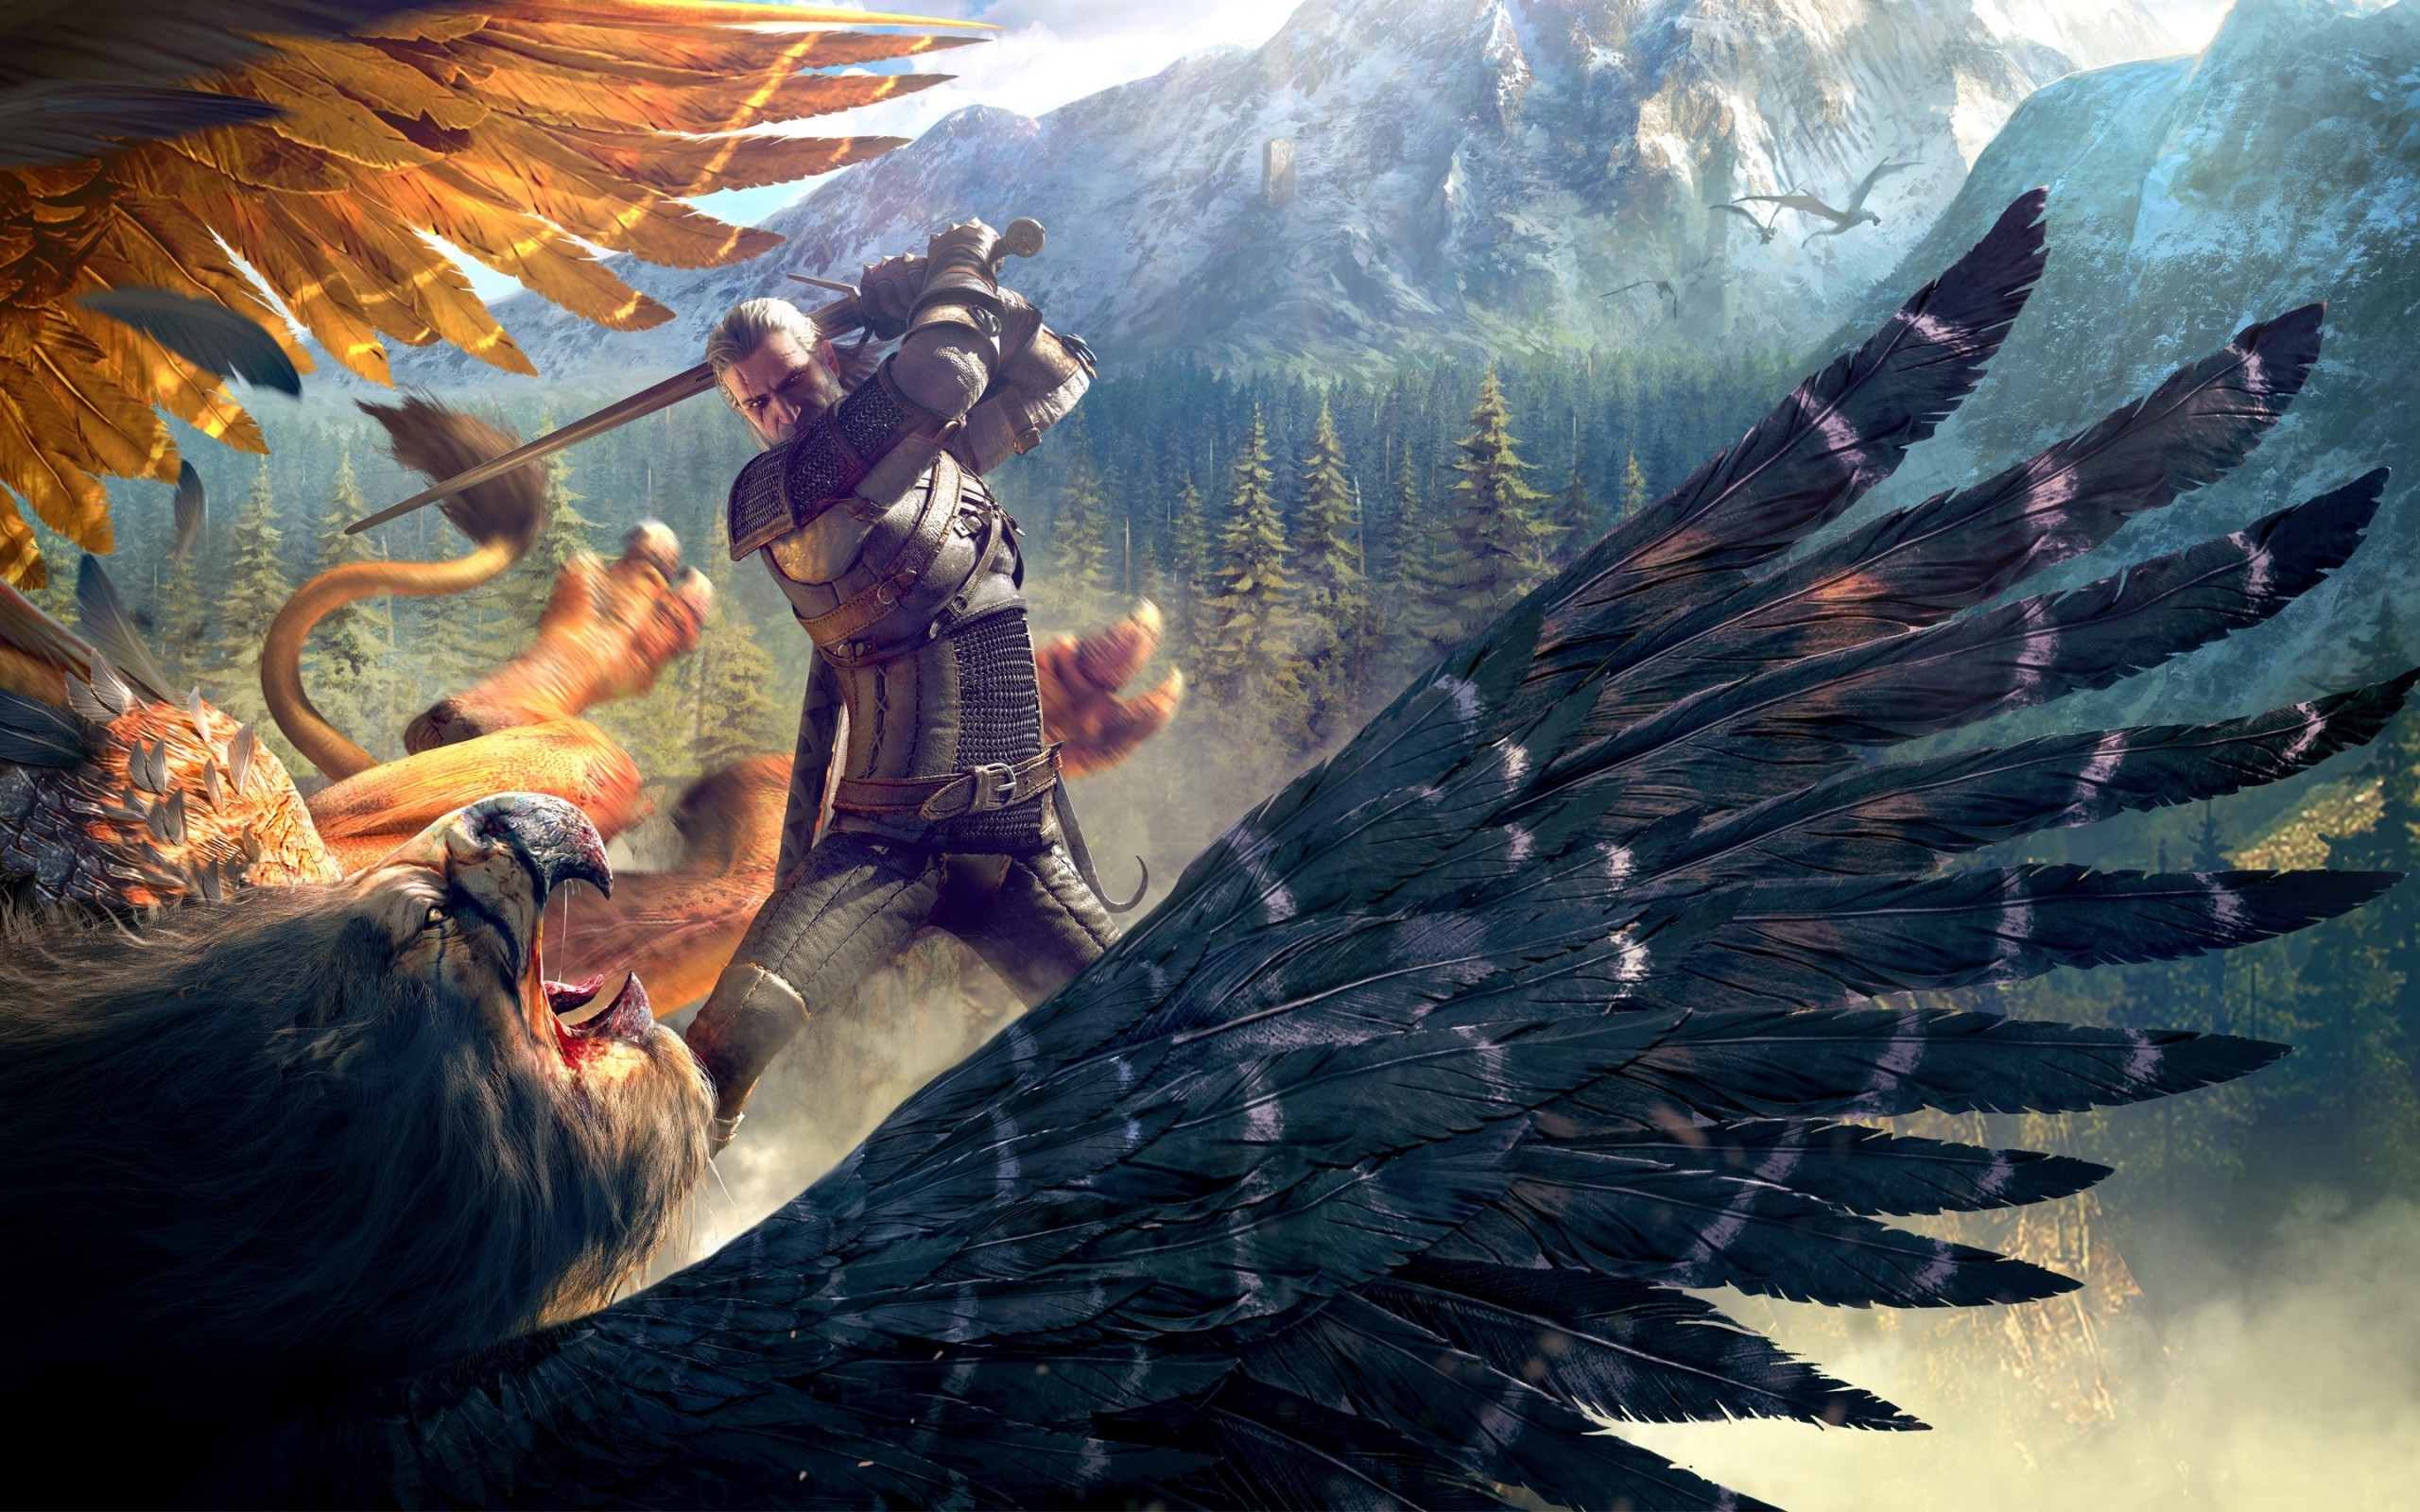 The Witcher, The Witcher 3: Wild Hunt, Video Games, Fantasy Art ...